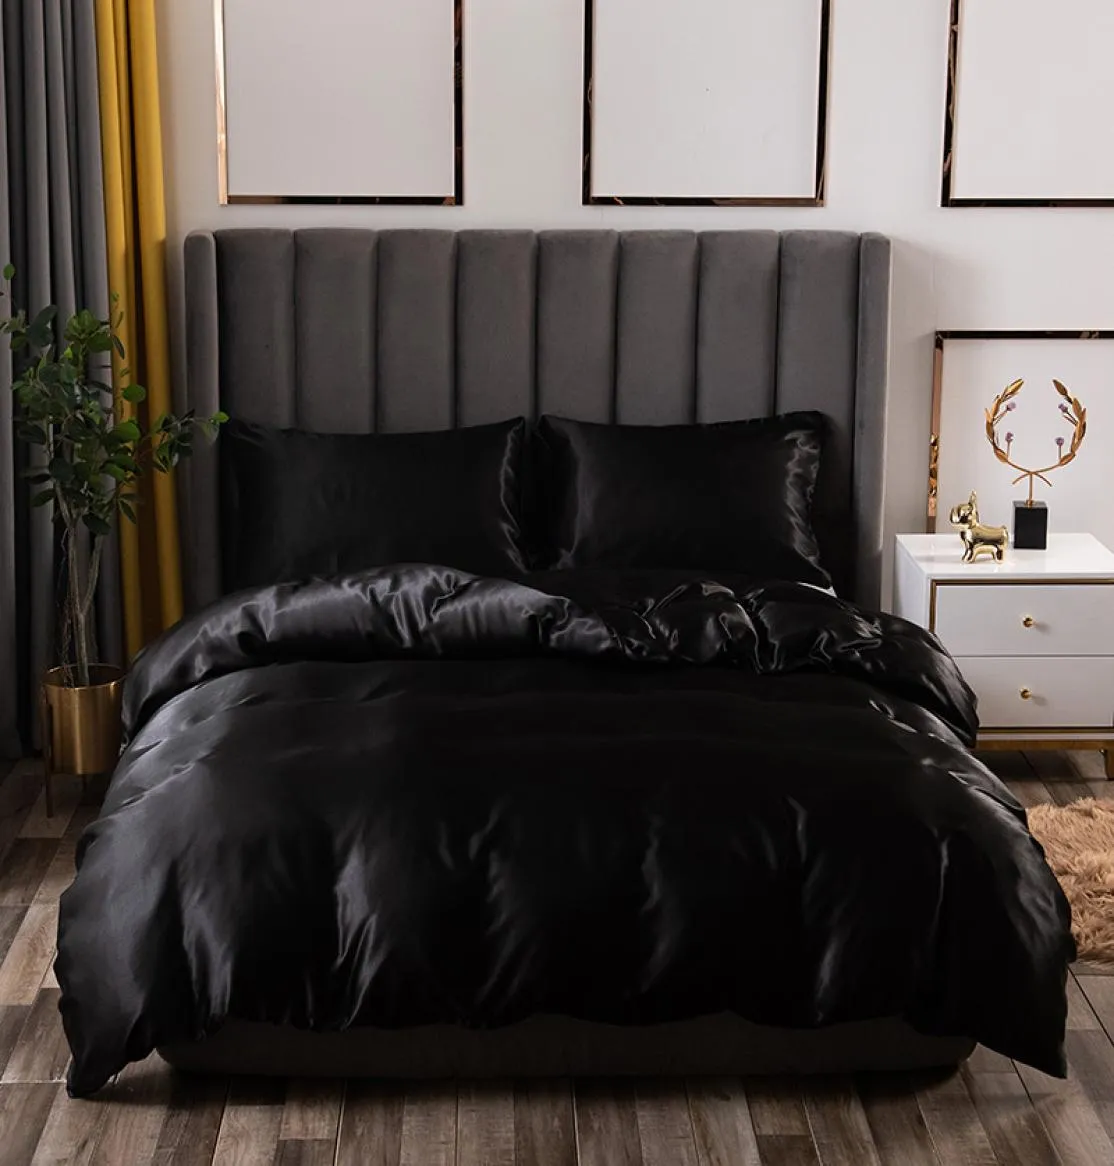 Luxury Bedding Set King Size Black Satin Silk Comforter Bed Home Textile Queen Size Duvet Cover CY2005192038554